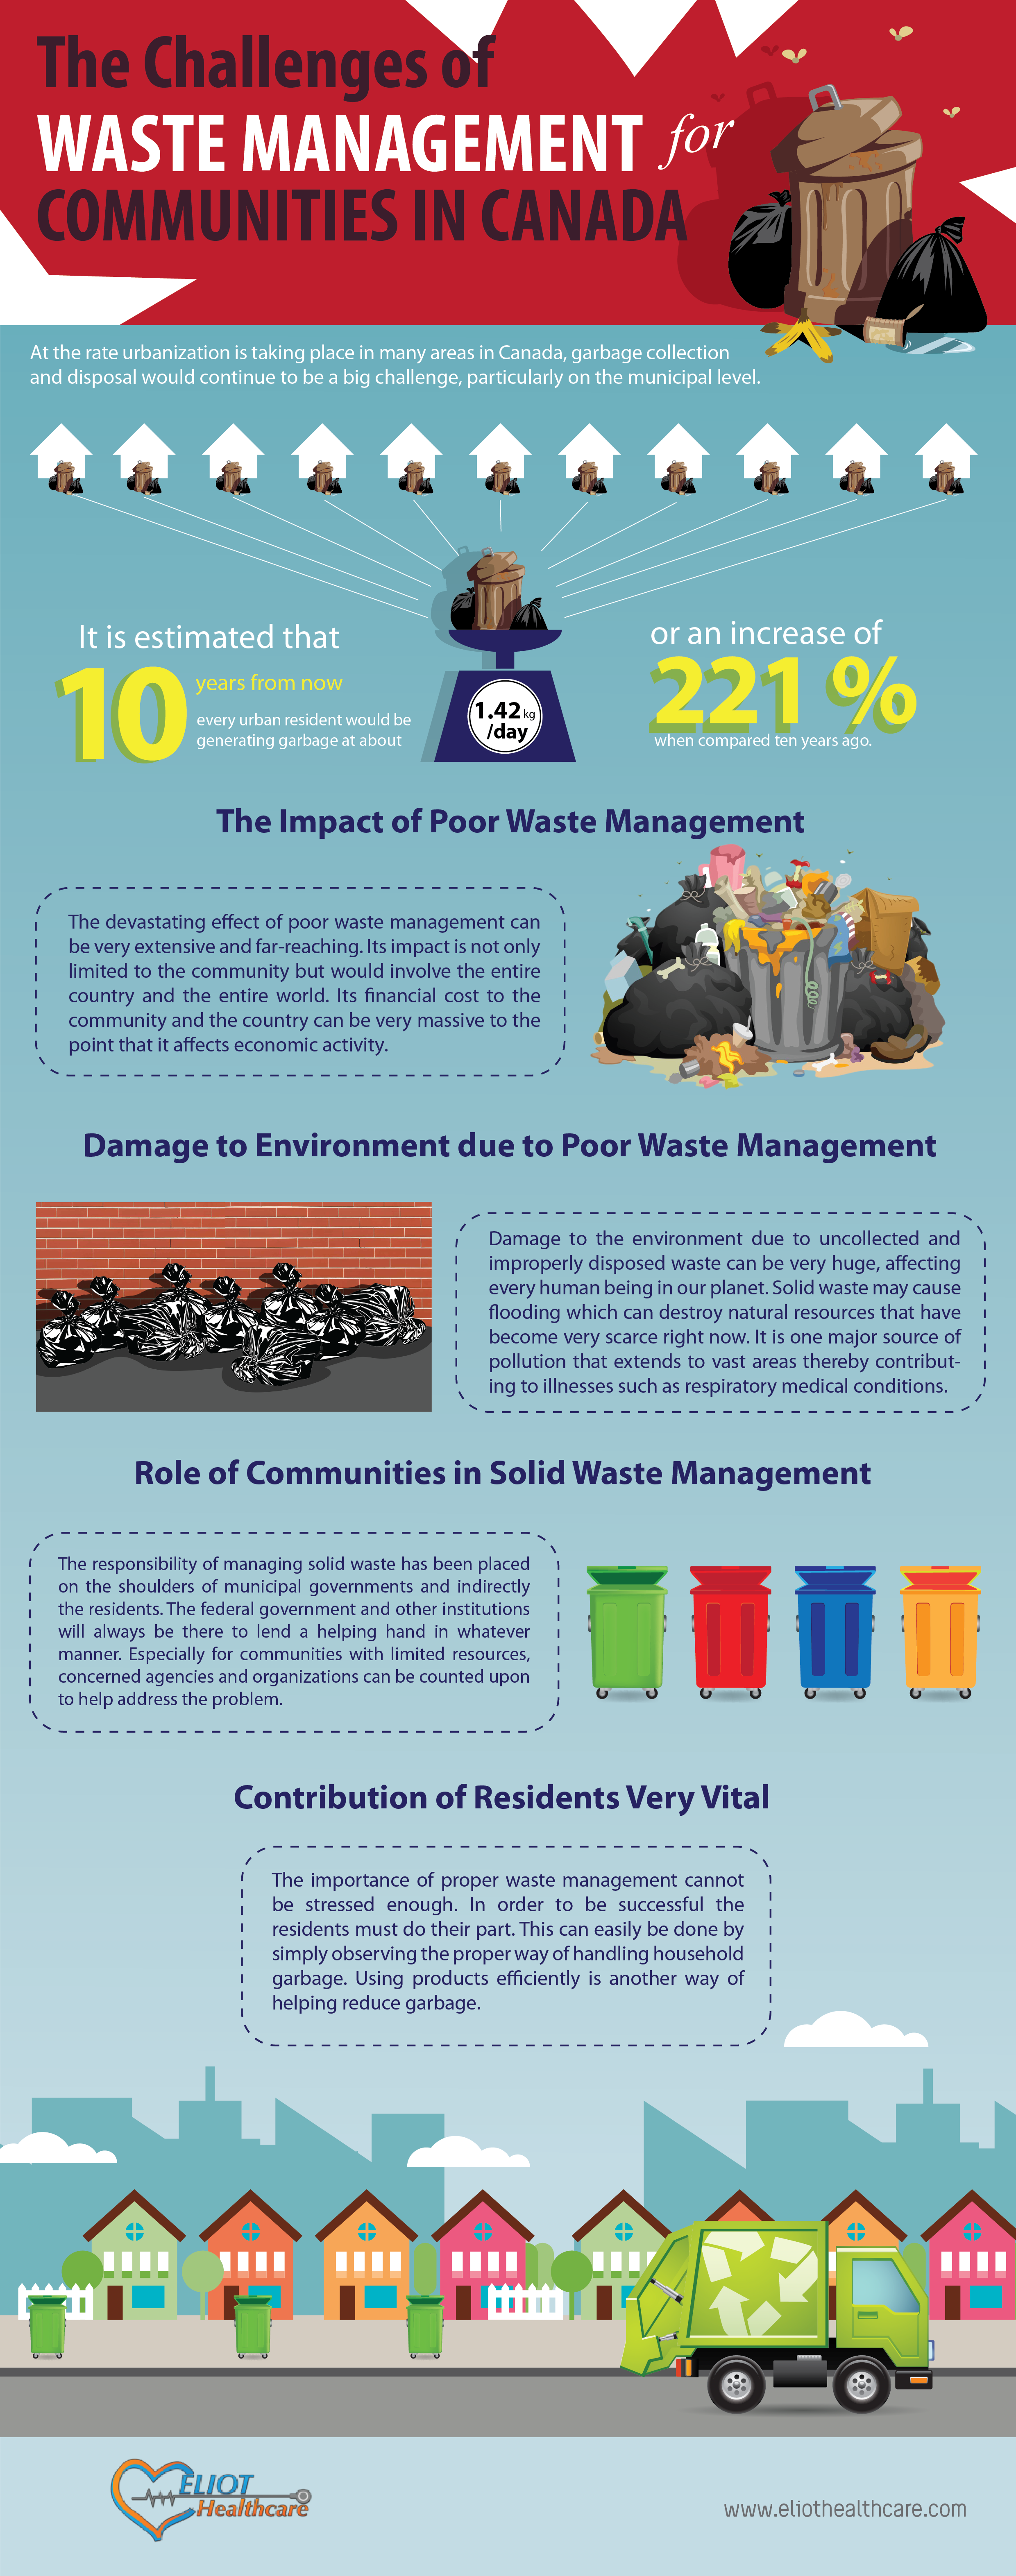 phd scholarships in waste management in canada